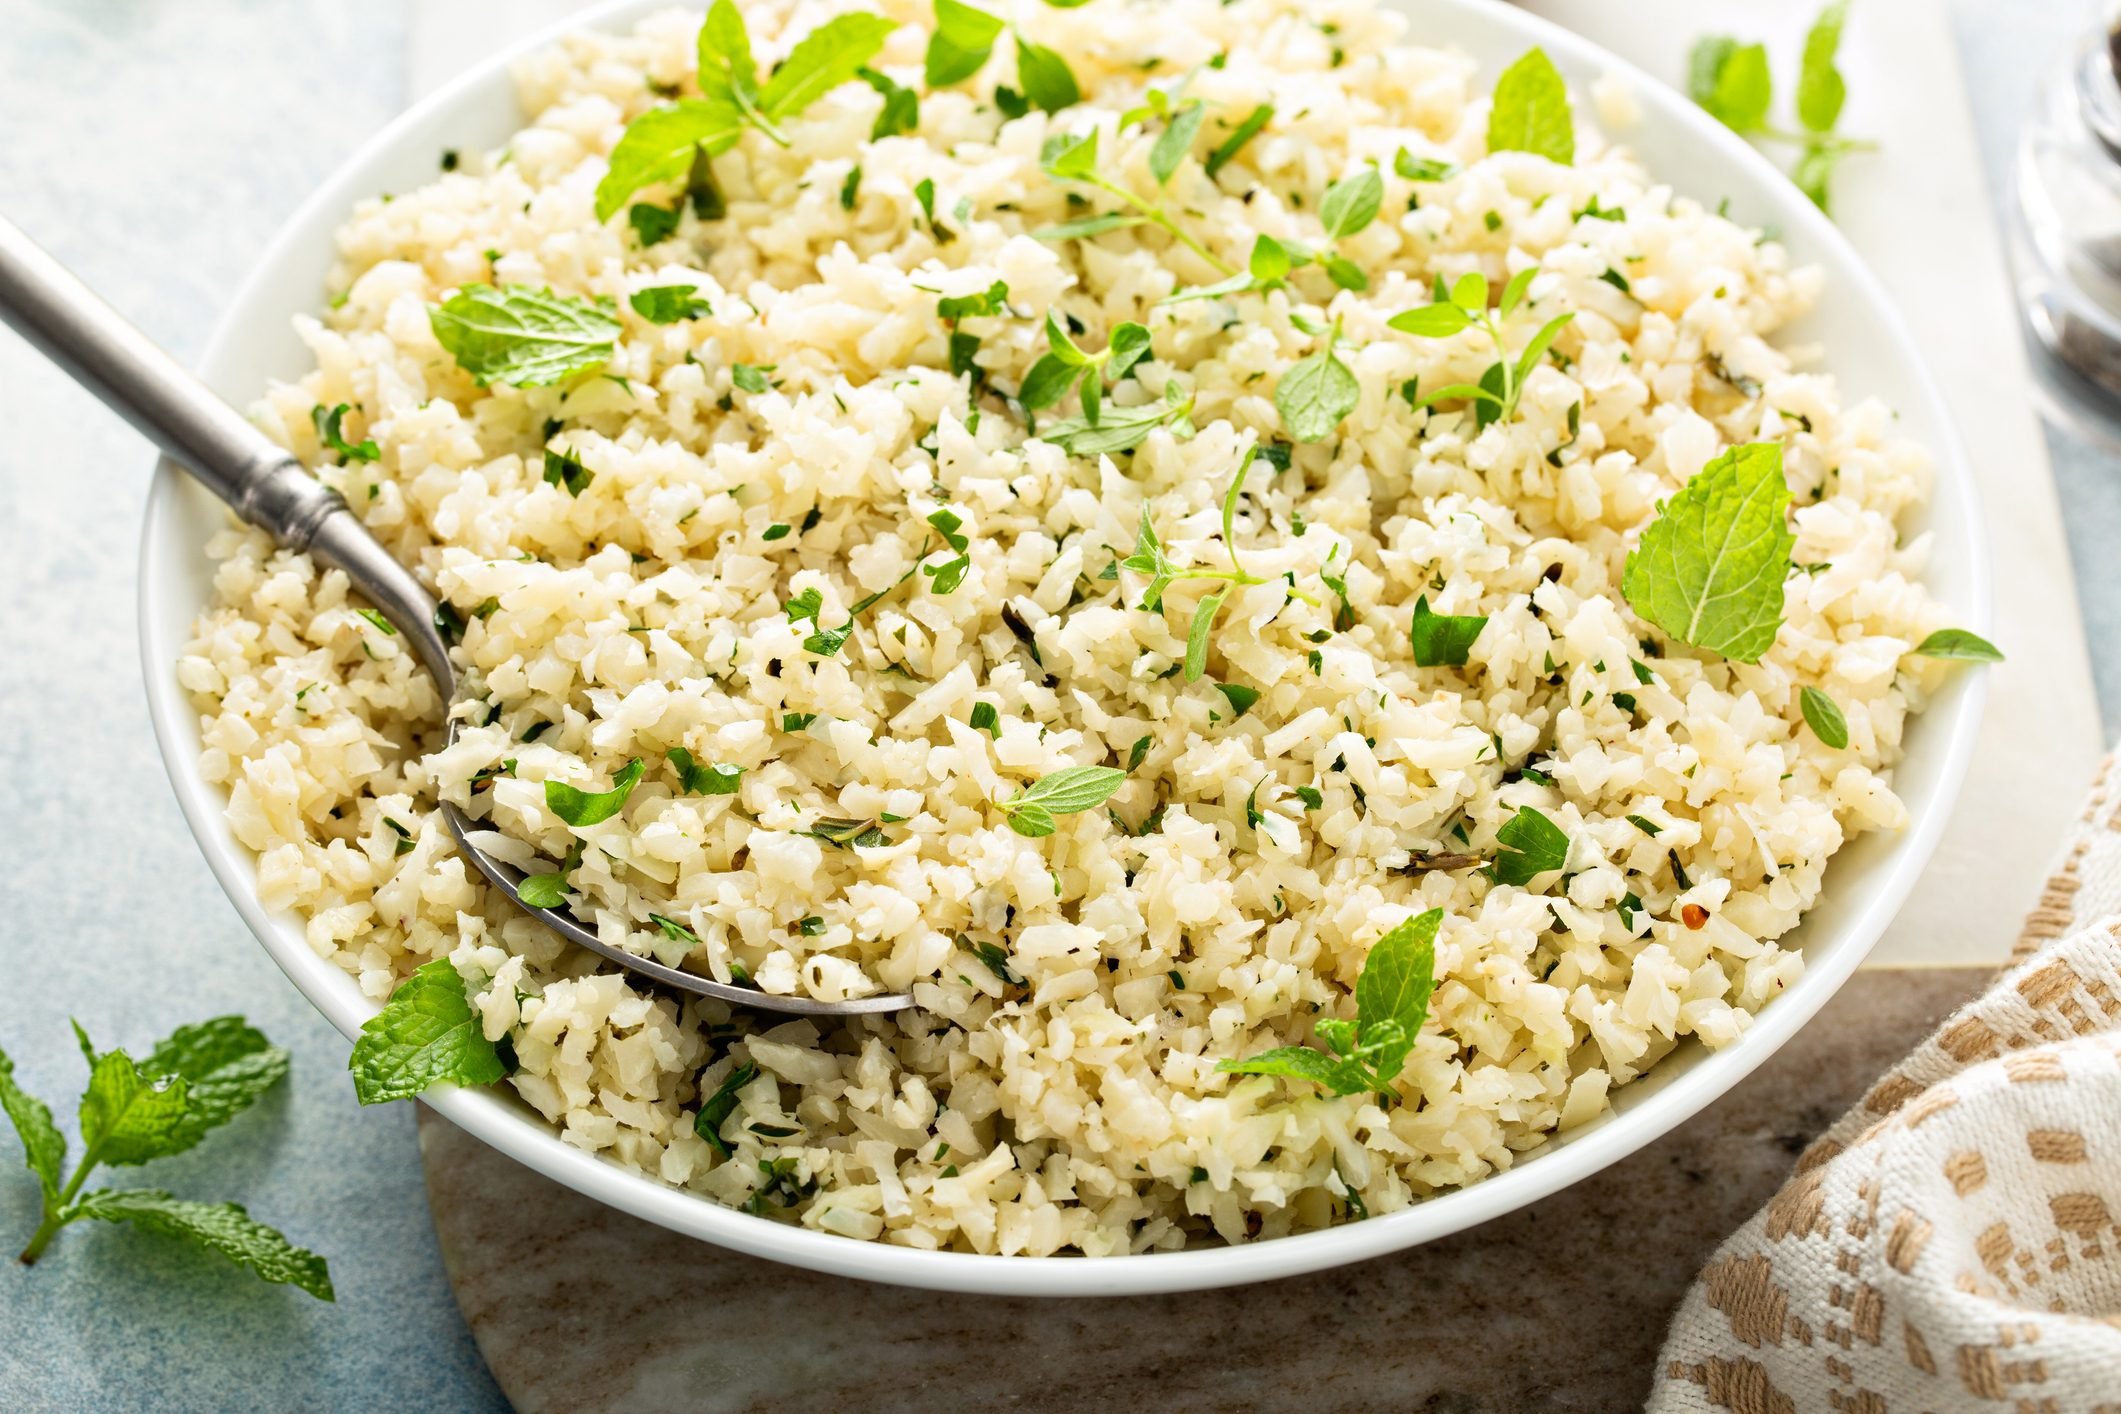 Cauliflower rice with herbs and lemon juice in a white bowl